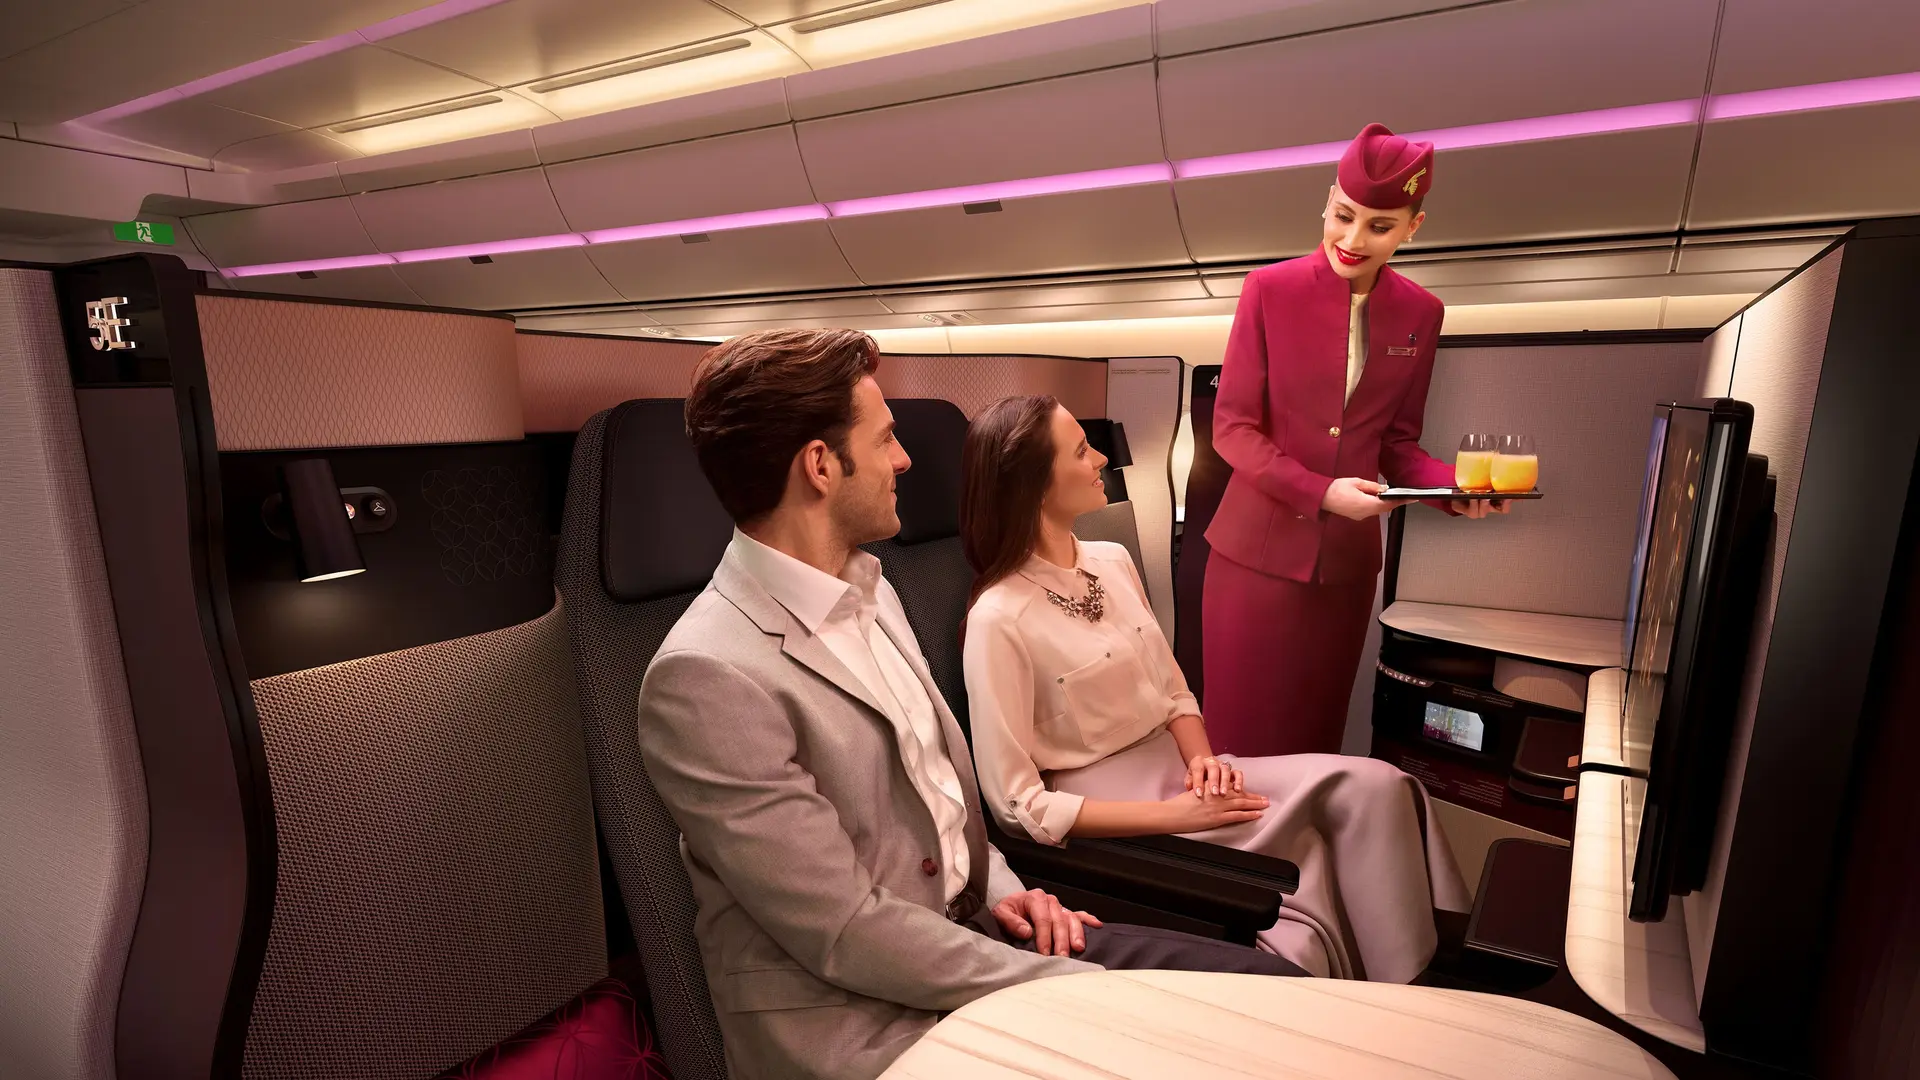 Airlines News - Qatar Airways unveils a new partner for its premium cabin amenity kits